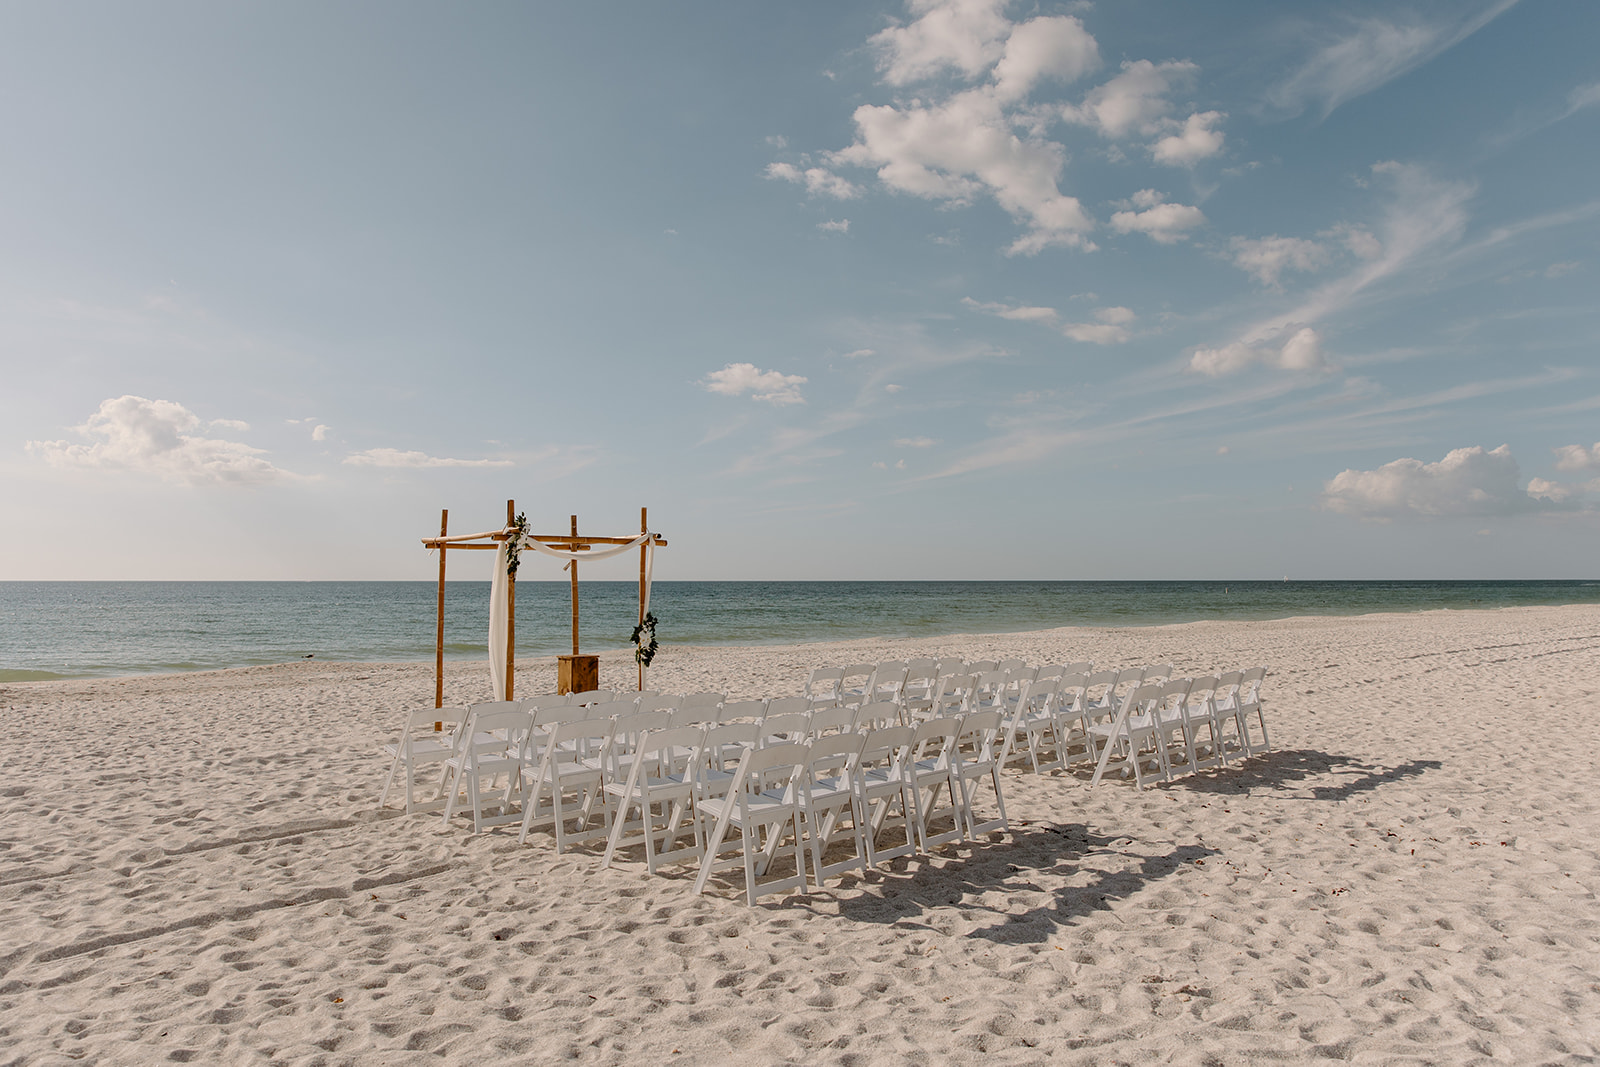 Ceremony site on the beach with the ocean and blue clouds in the back